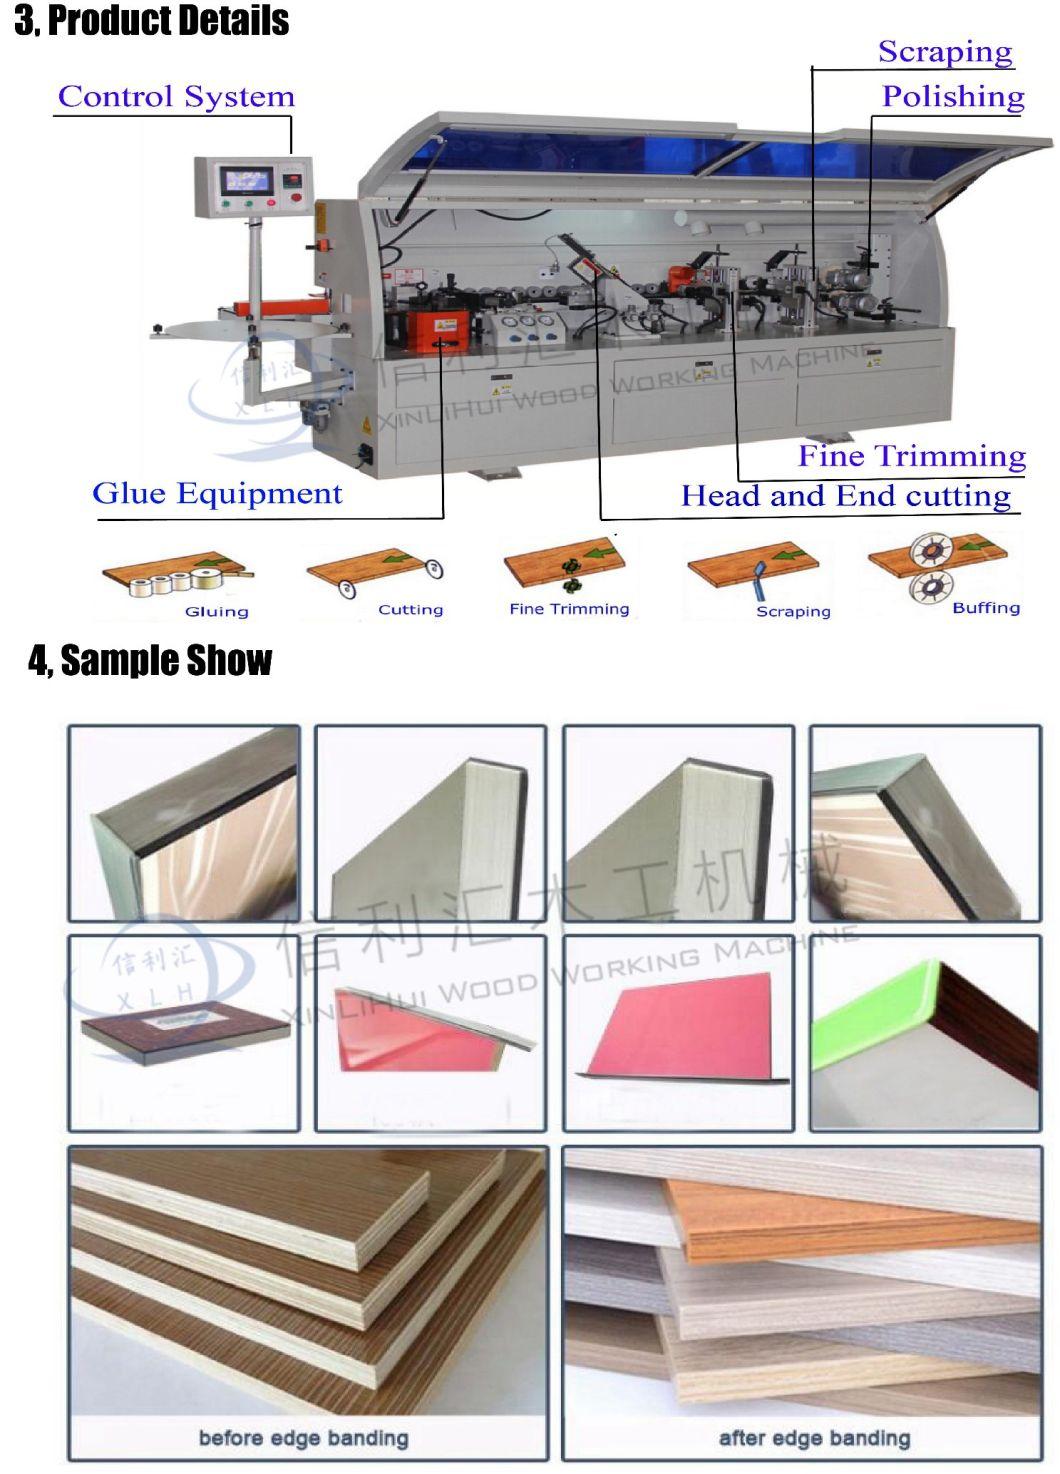 Edge Laminating Machine to Edge Laminated Boards/PVC/MDF and Partical Board in Malaysia PVC Edging Tape Furniture Fitting Manufacturing/Wood Flooring Machinery